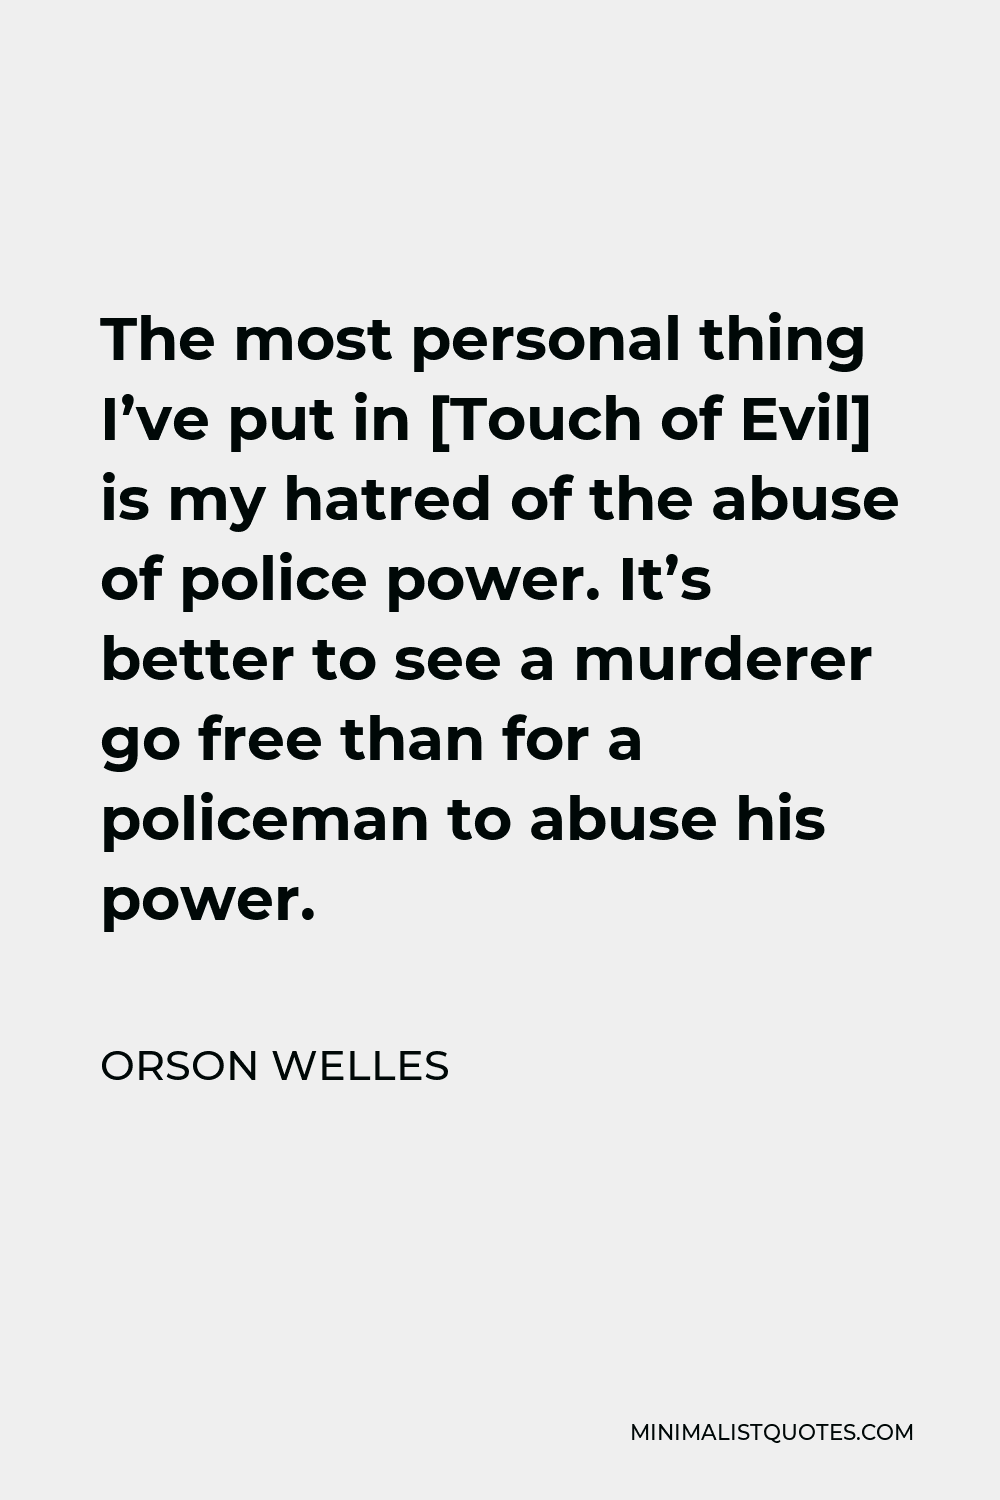 Orson Welles Quote - The most personal thing I’ve put in [Touch of Evil] is my hatred of the abuse of police power. It’s better to see a murderer go free than for a policeman to abuse his power.